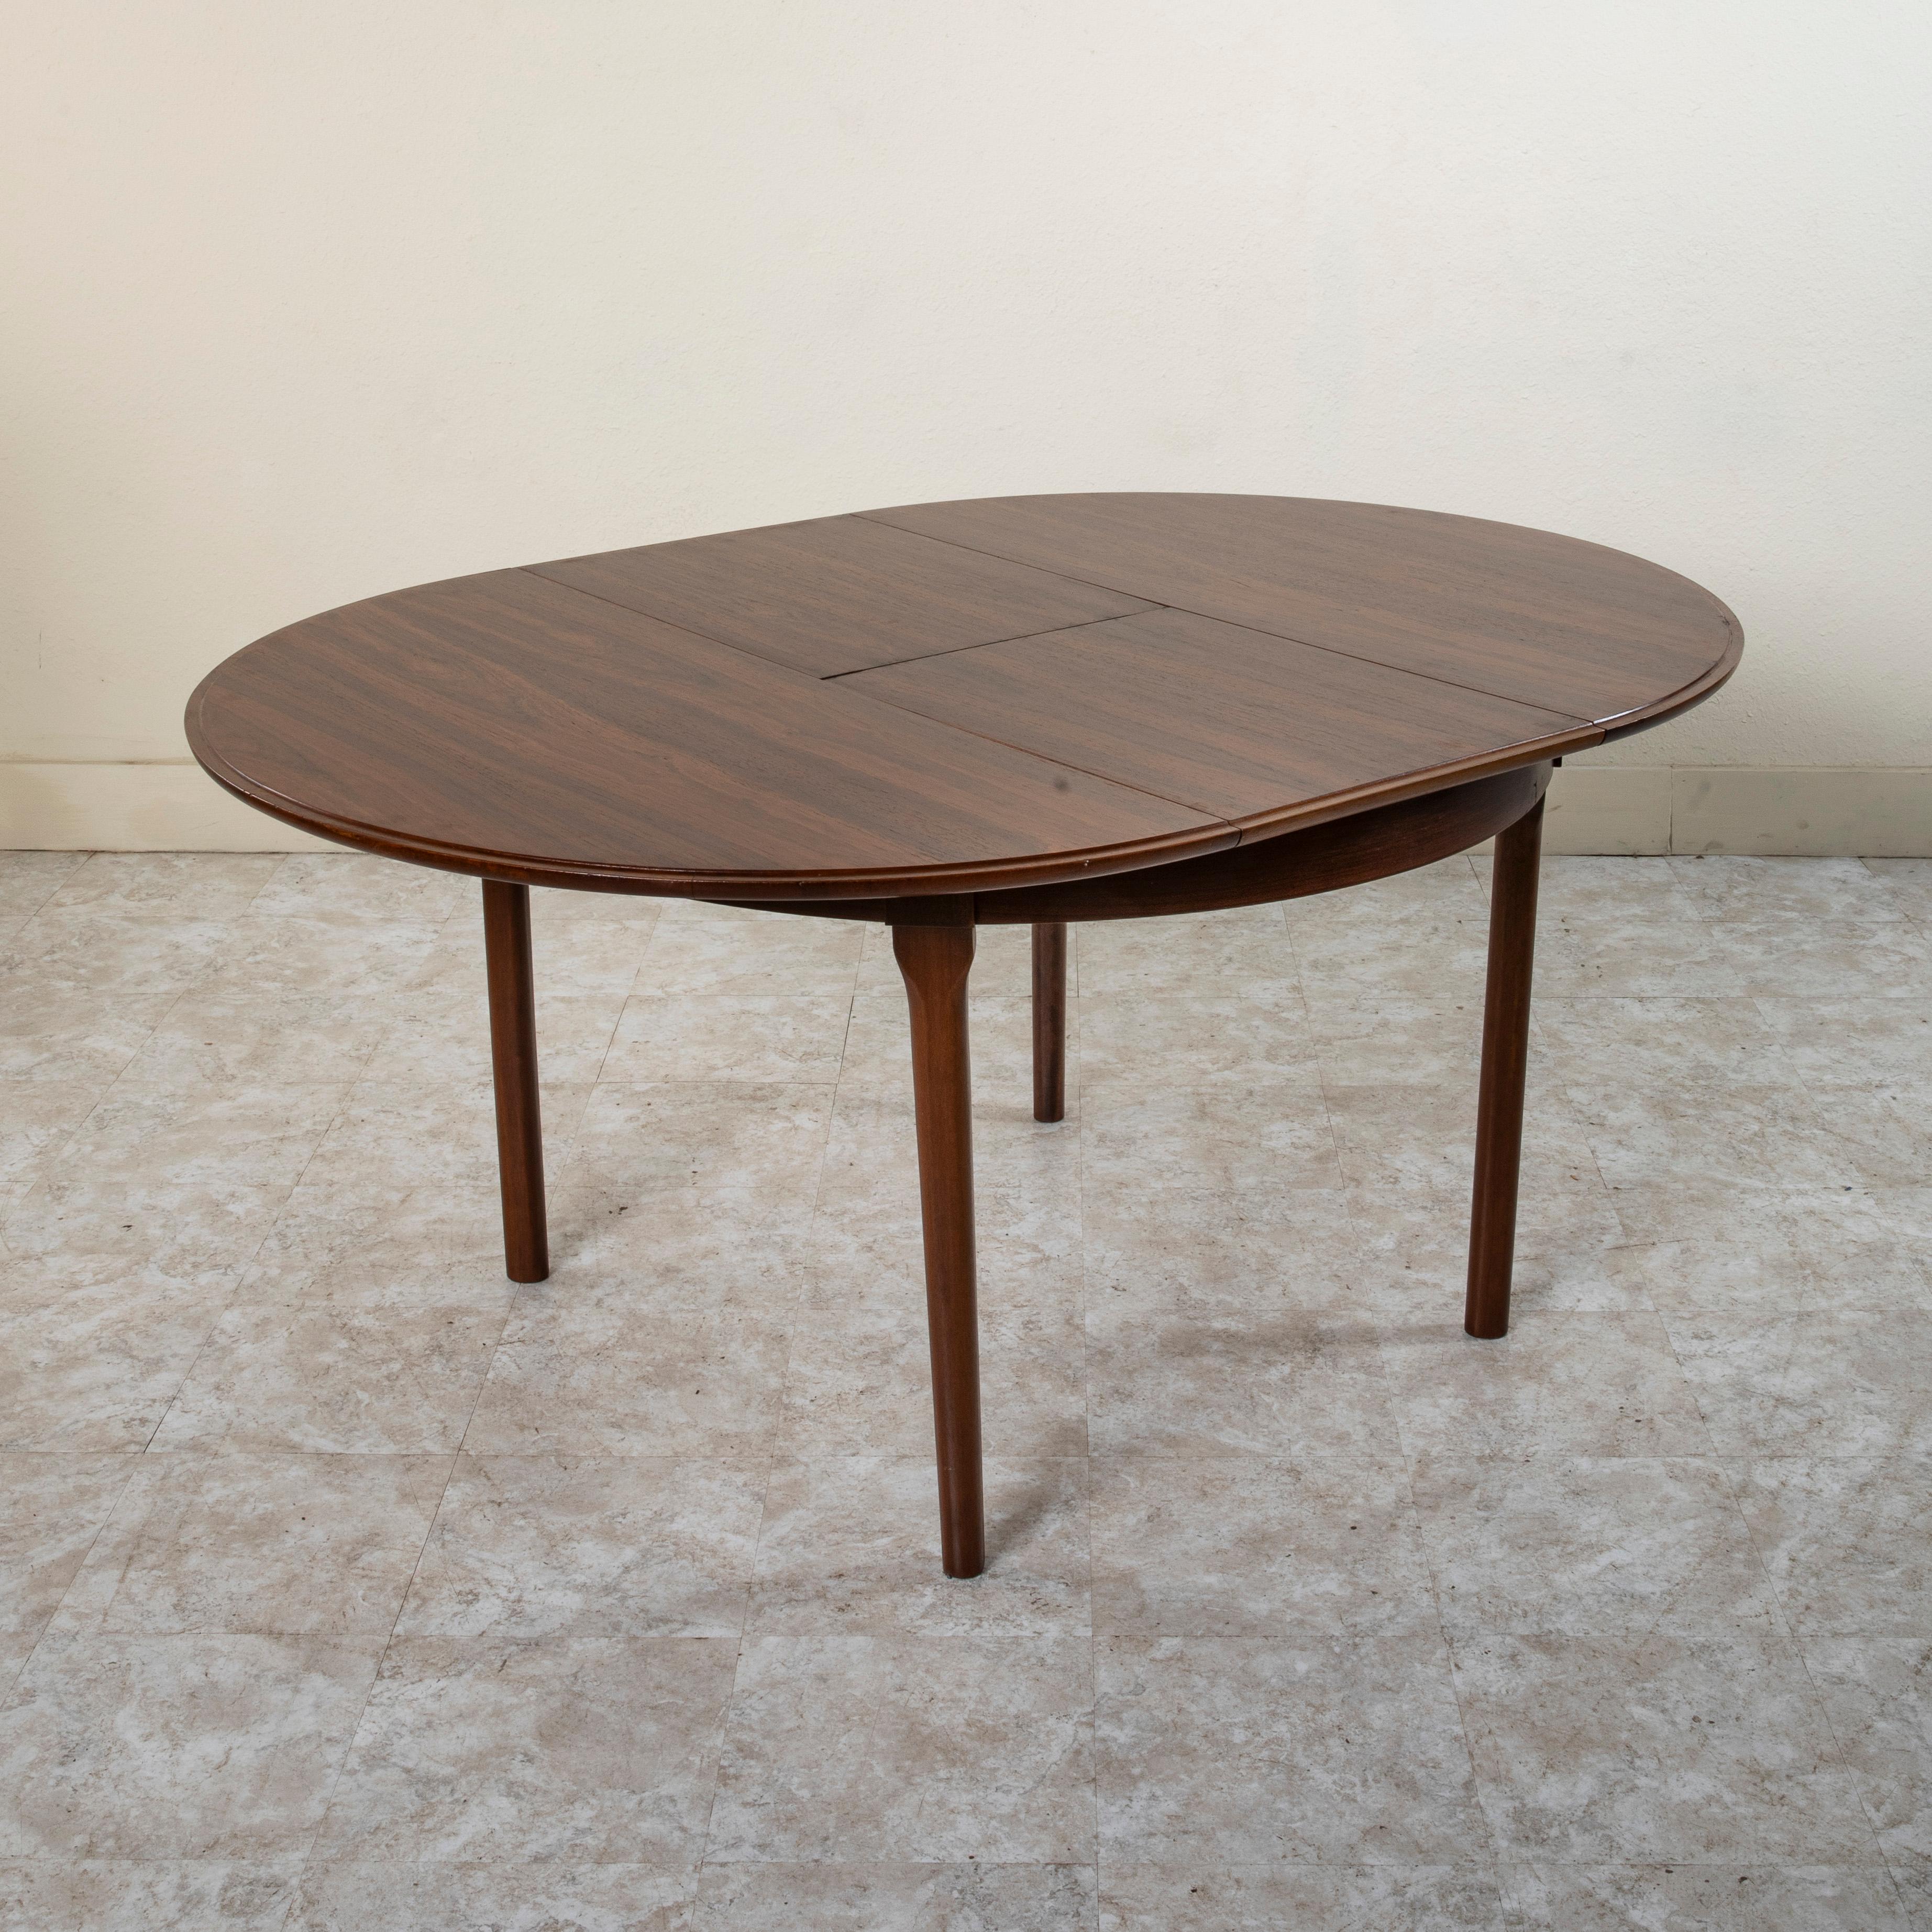 Palisander Mid-20th Century Danish Rosewood Round to Oval Dining Table, Collapsible Leaf For Sale